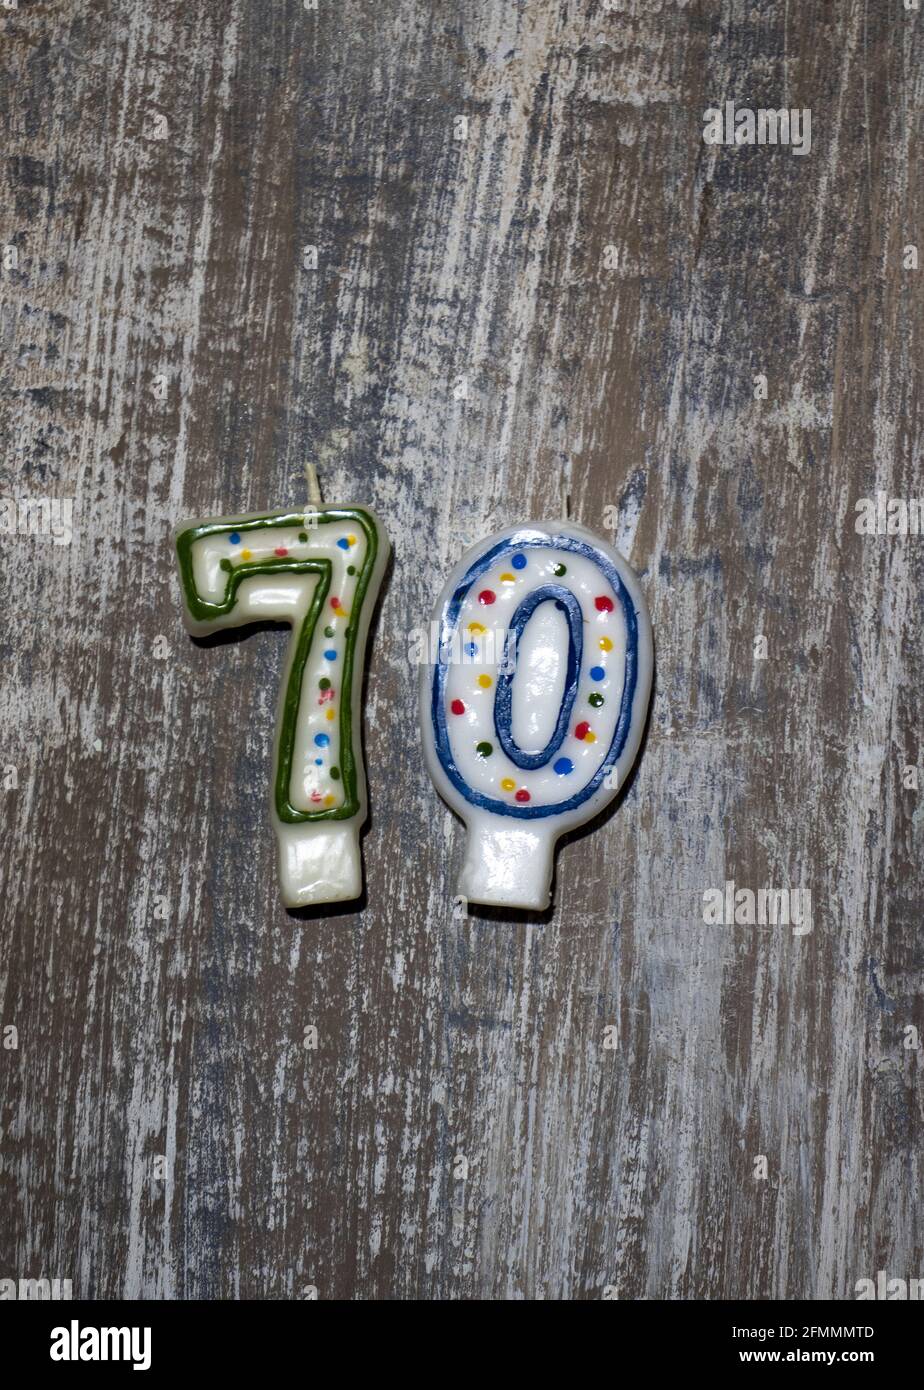 Vertical shot of birthday candles with the number 70 on a wooden background Stock Photo